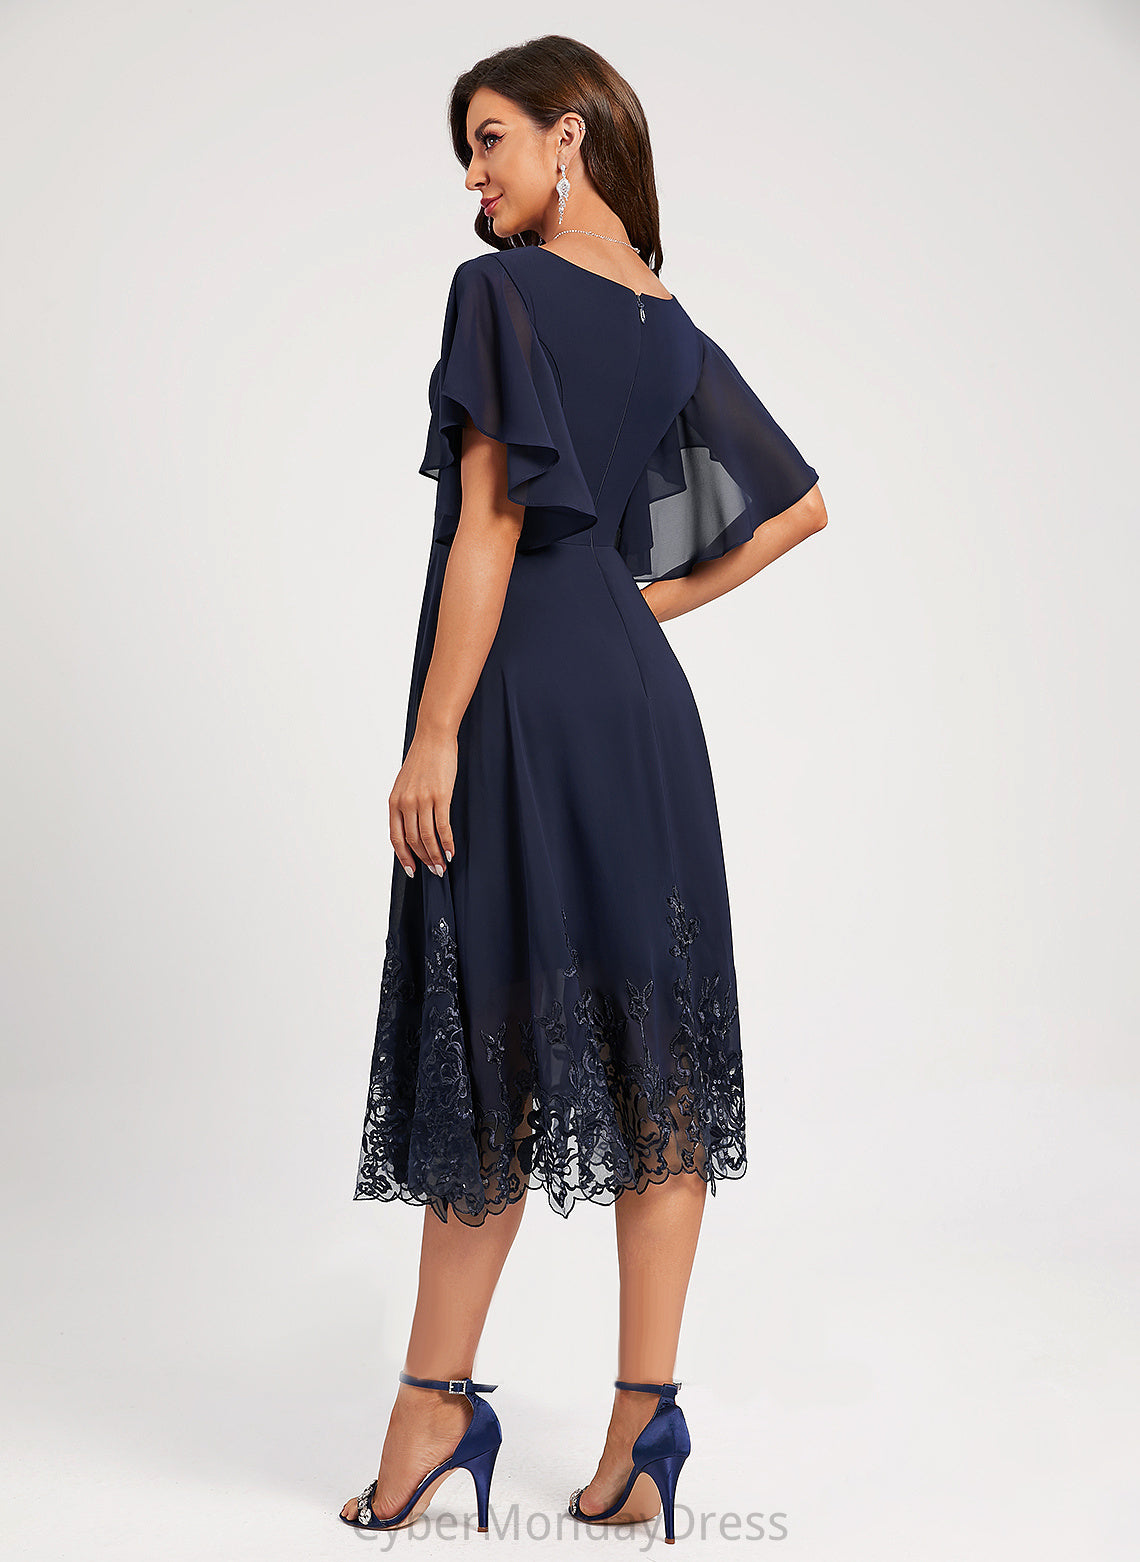 V-neck Sequins Lace With A-Line Sequined Tea-Length Lace Cocktail Dresses Cocktail Dress Nataly